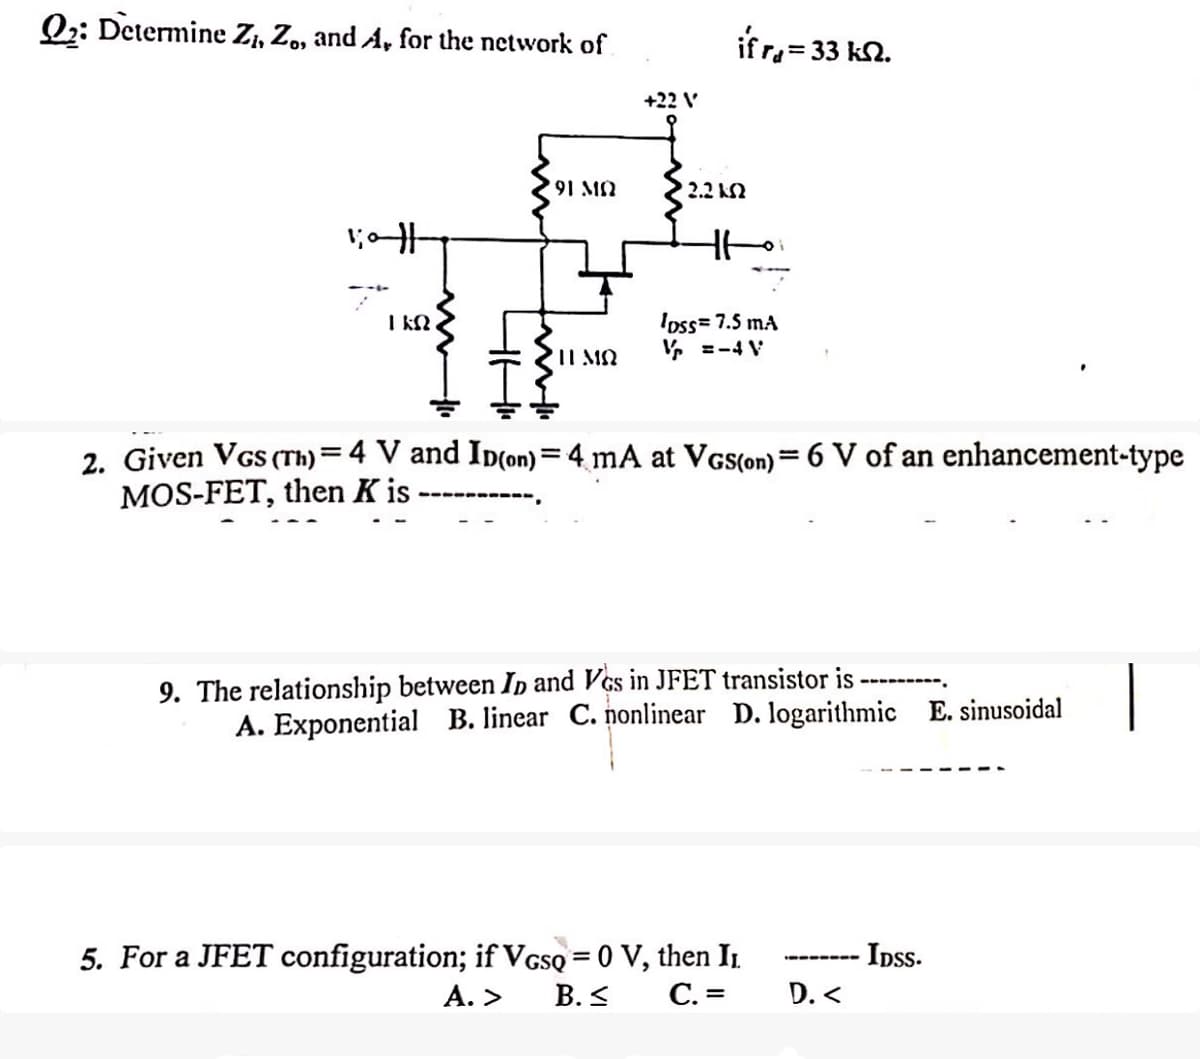 Q2: Determine Zi, Z., and A, for the network of
+22 V
ifr₁ = 33 k.
#10:1
91 MO
2.2 ΚΩ
ΓΕΩ
Η ΜΩ
loss=7.5 mA
V=-4 V
2. Given VGS (Th) = 4 V and ID(on) = 4 mA at VGS(on) = 6 V of an enhancement-type
MOS-FET, then K is
9. The relationship between ID and Vos in JFET transistor is
A. Exponential B. linear C. nonlinear D. logarithmic E. sinusoidal
5. For a JFET configuration; if VGSQ = 0 V, then Iɲ
A. > B.≤
C. =
D.<
IDSS.
|